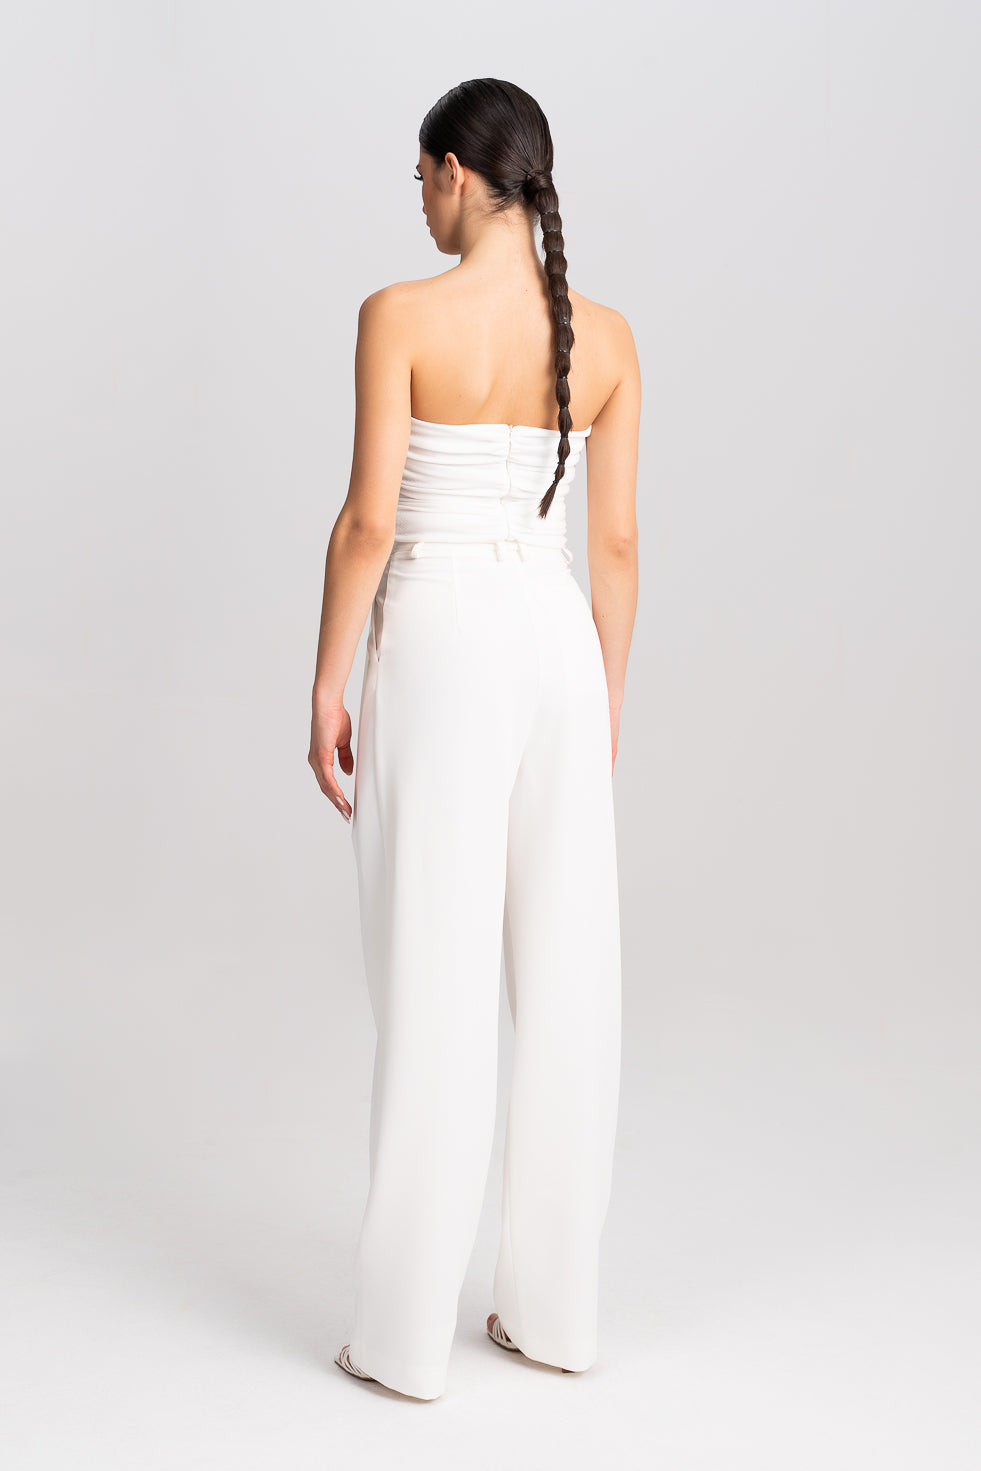 'Thana' Embellished Cut-out White Top